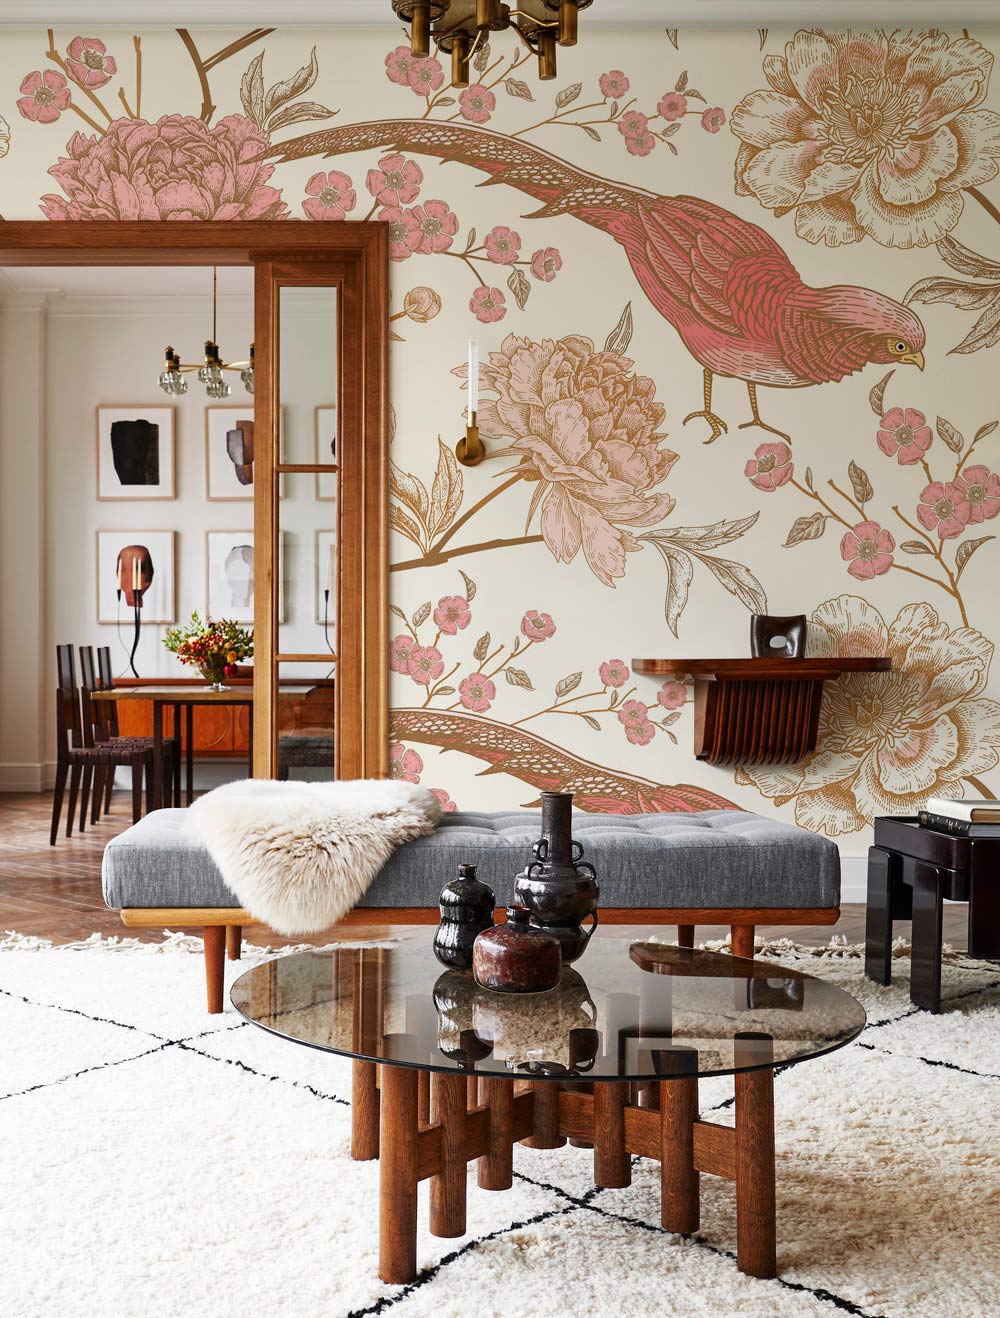 Animal wallpaper with a floral blossom and a bird's eye view